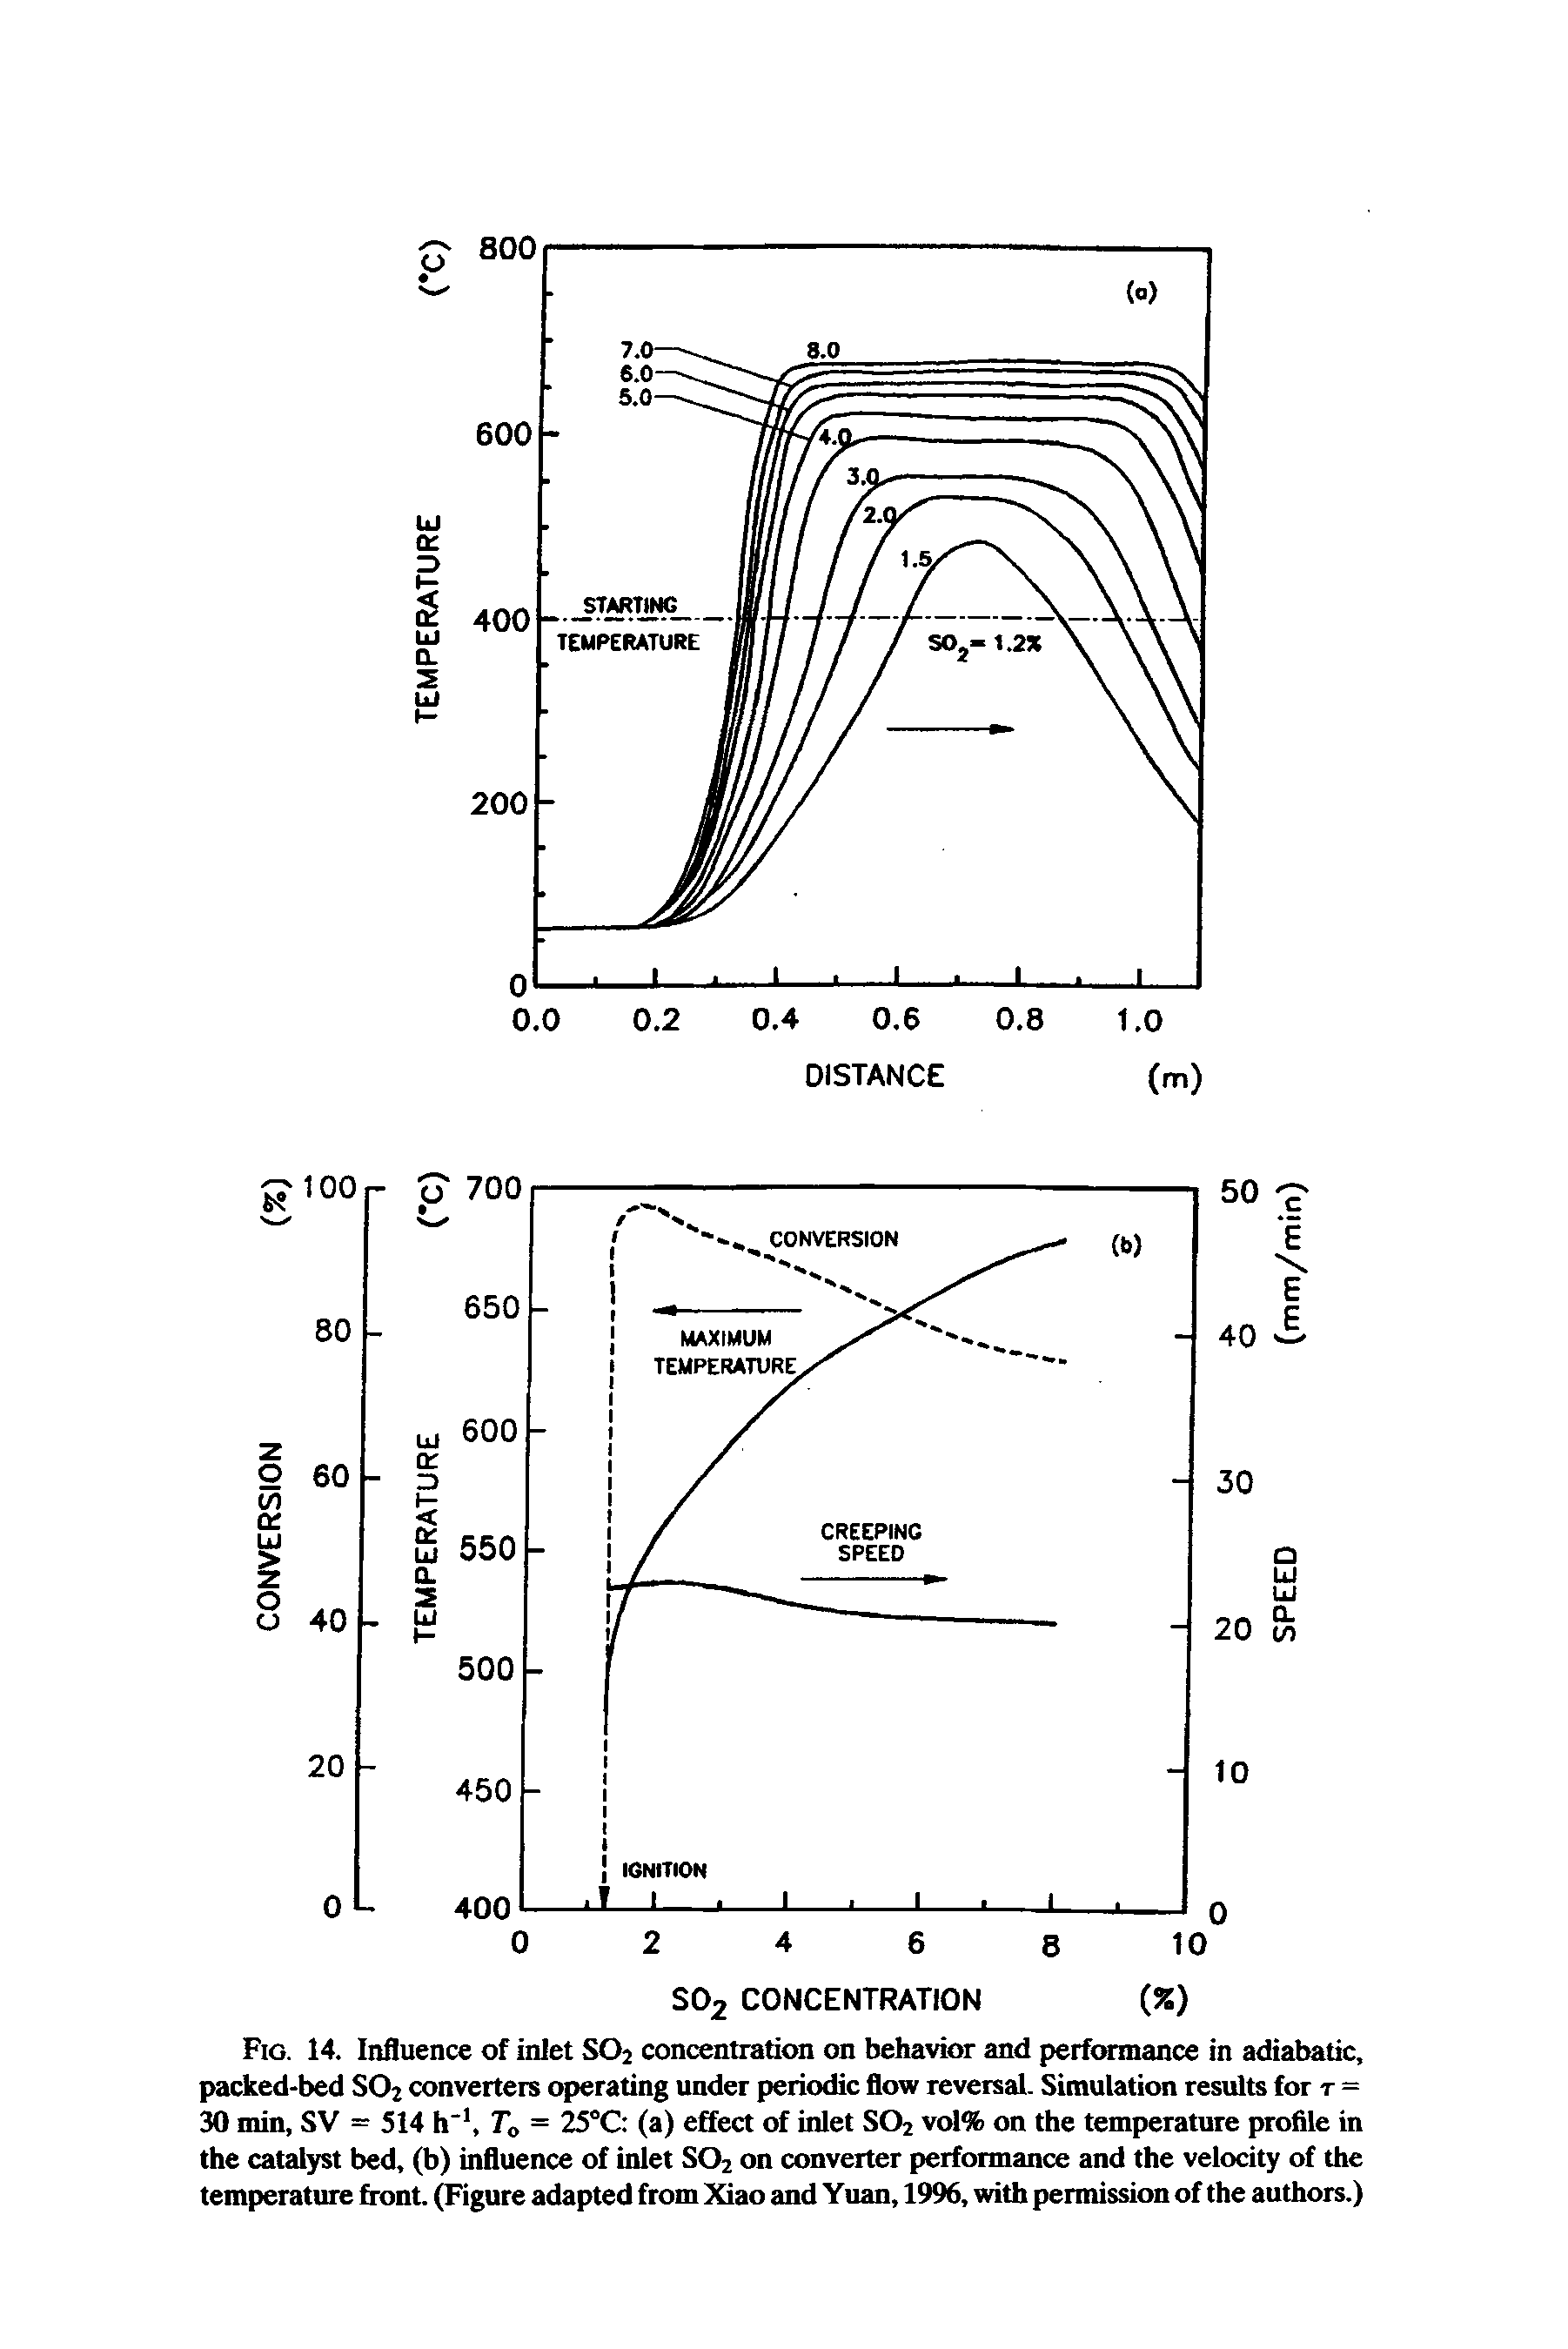 Fig. 14. Influence of inlet SO2 concentration on behavior and performance in adiabatic, packed-bed SOj converters operating under periodic flow reversal. Simulation results for t = 30 min, SV = 514 h 1, Ta = 25°C (a) effect of inlet SO2 vol% on the temperature profile in the catalyst bed, (b) influence of inlet S02 on converter performance and the velocity of the temperature front. (Figure adapted from Xiao and Yuan, 1996, with permission of the authors.)...